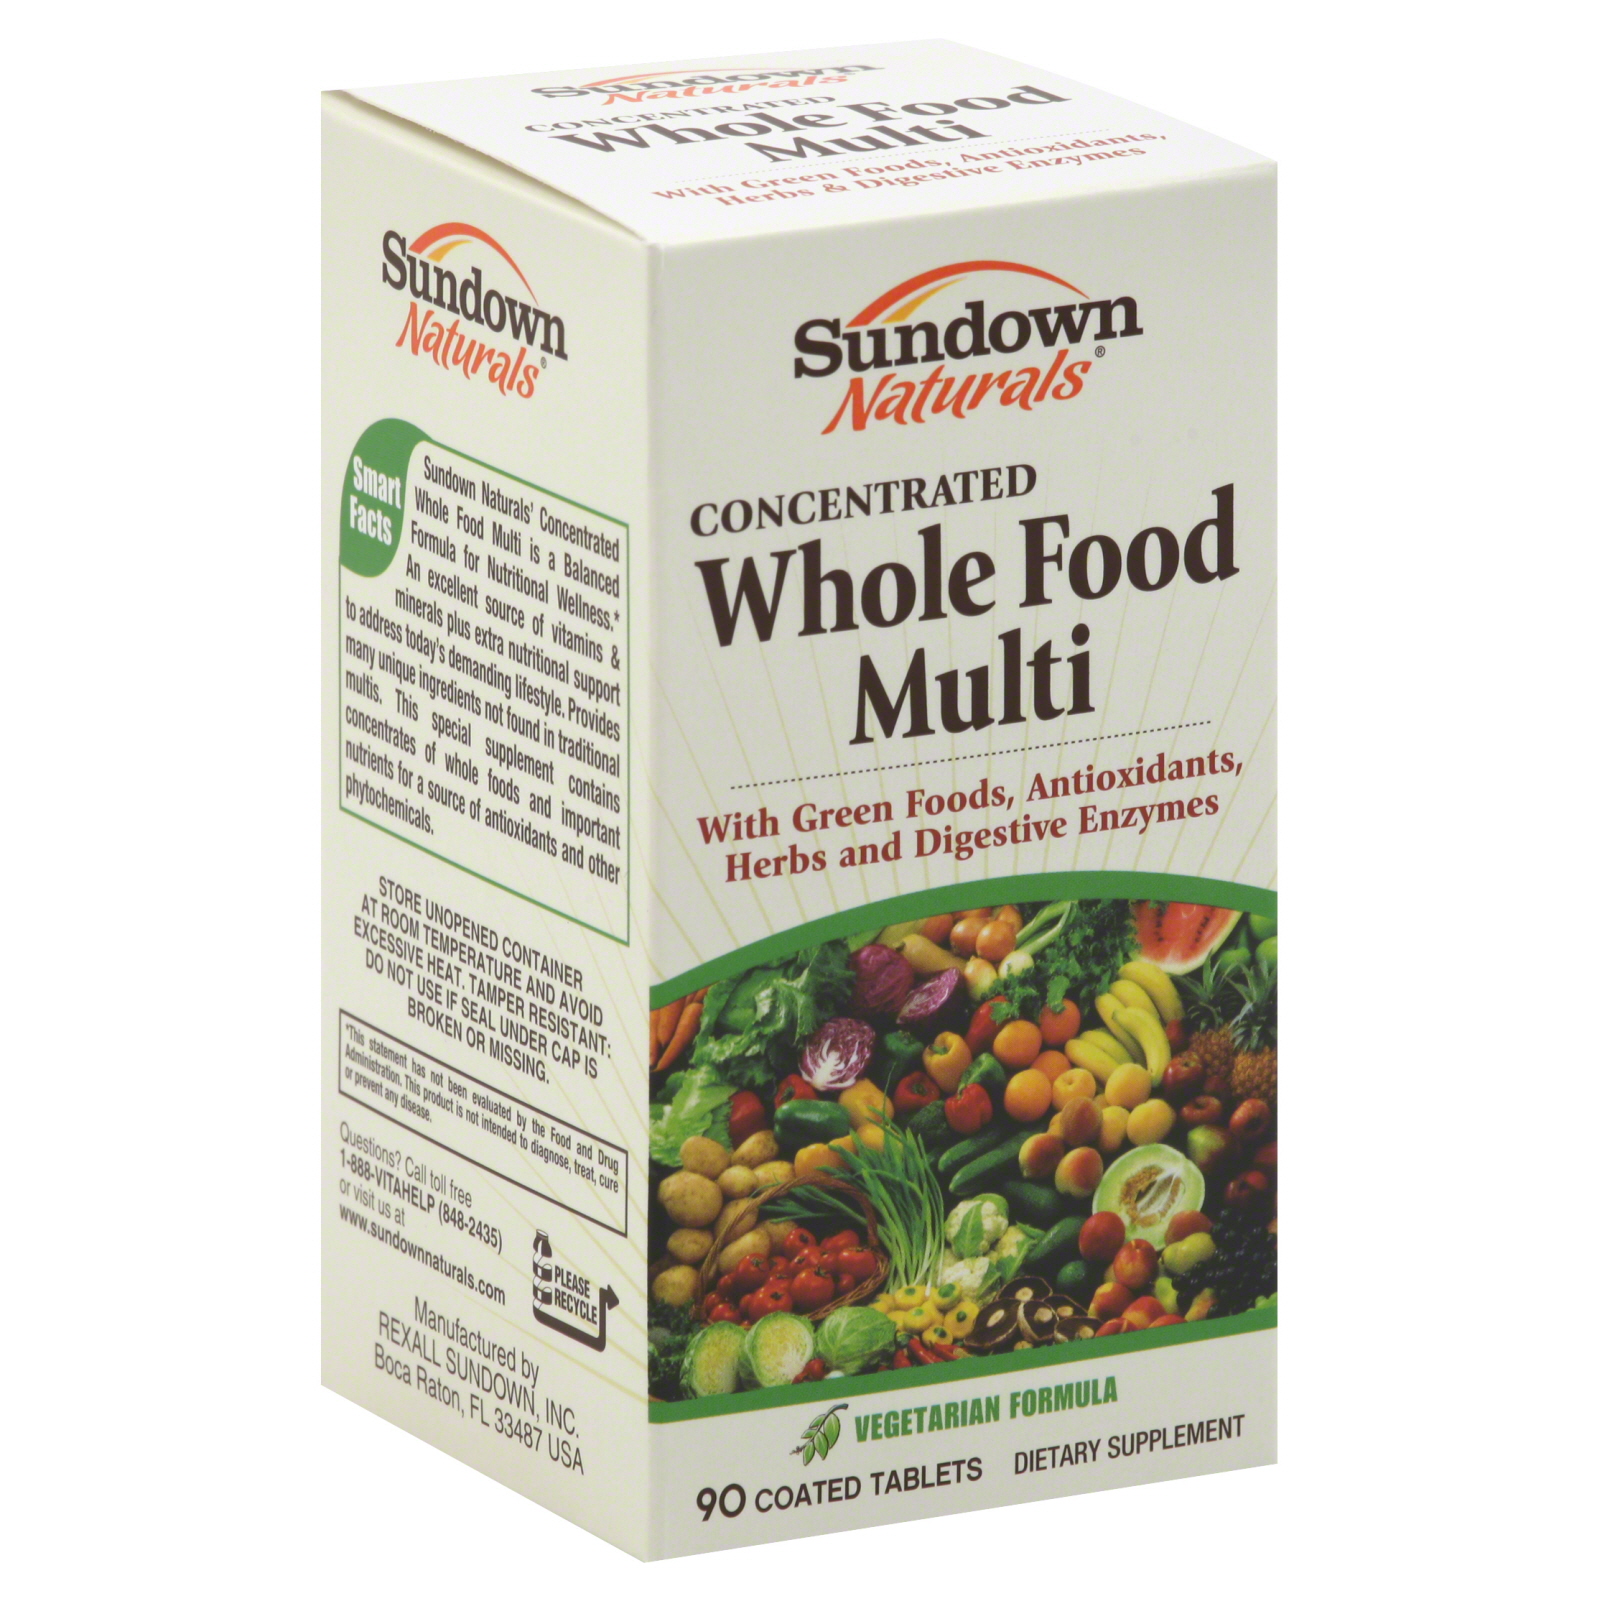 Sundown Naturals Whole Food Concentrate Multivitamin Tablets